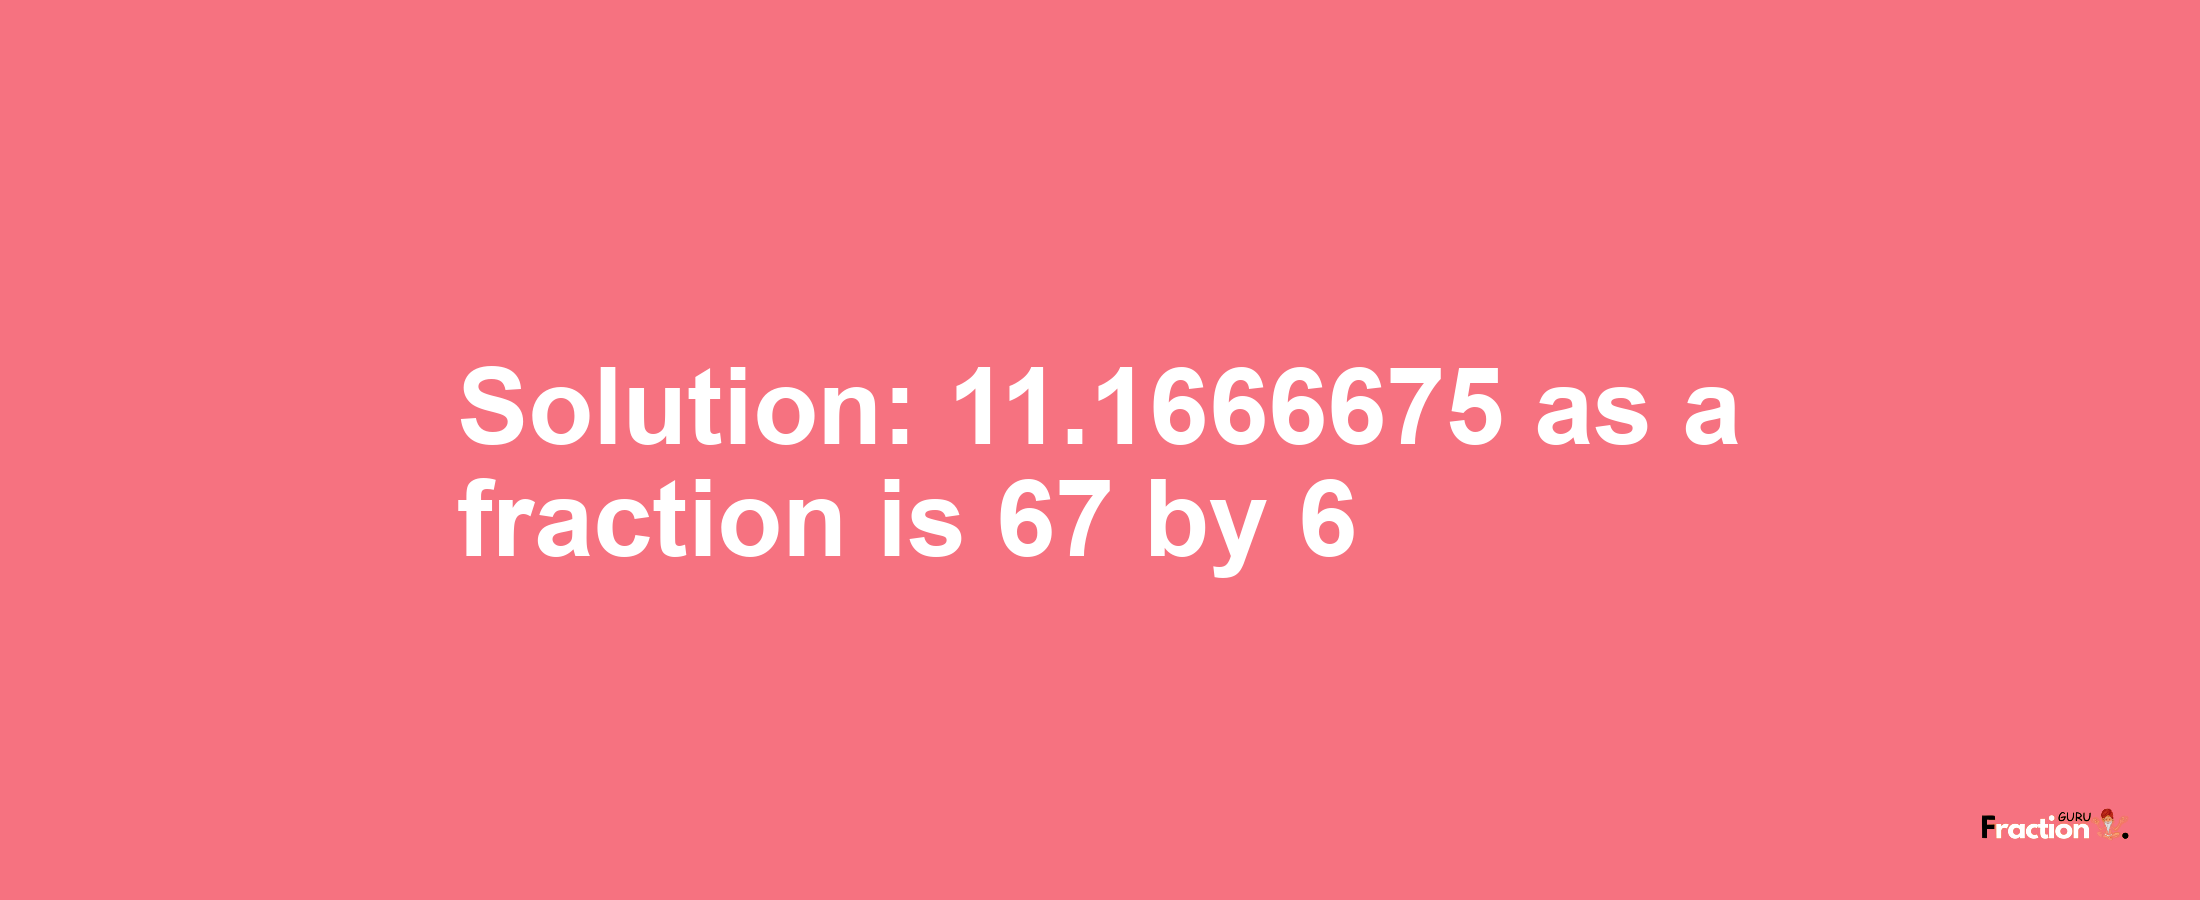 Solution:11.1666675 as a fraction is 67/6